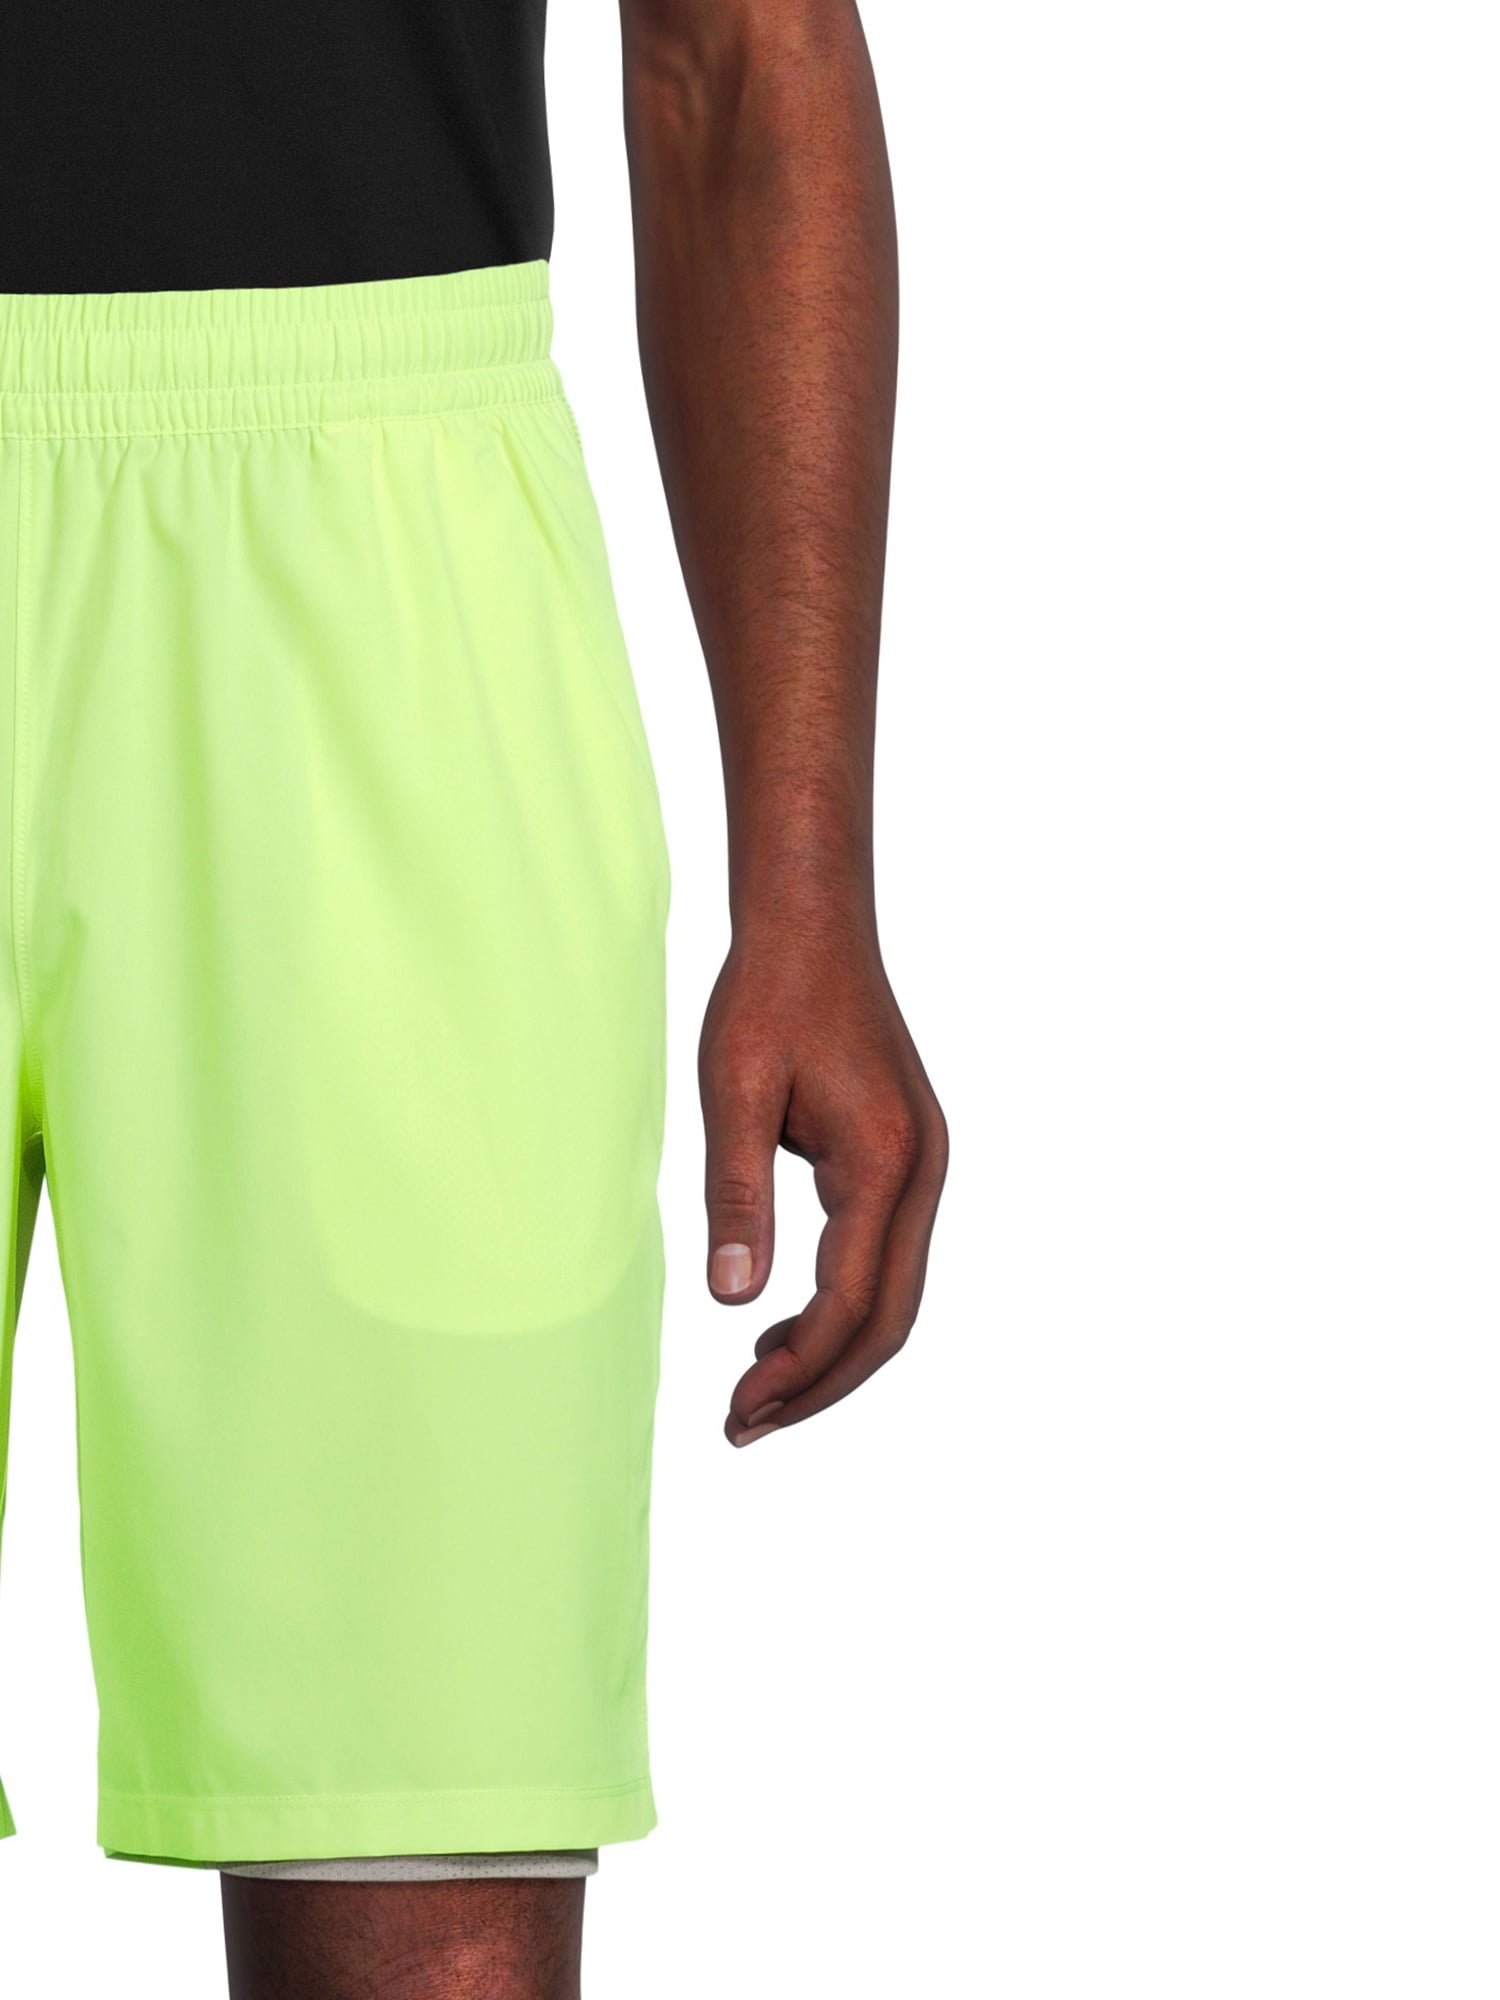 Athletic Works Men's 2-in-1 Workout Short with Built-In Pocket